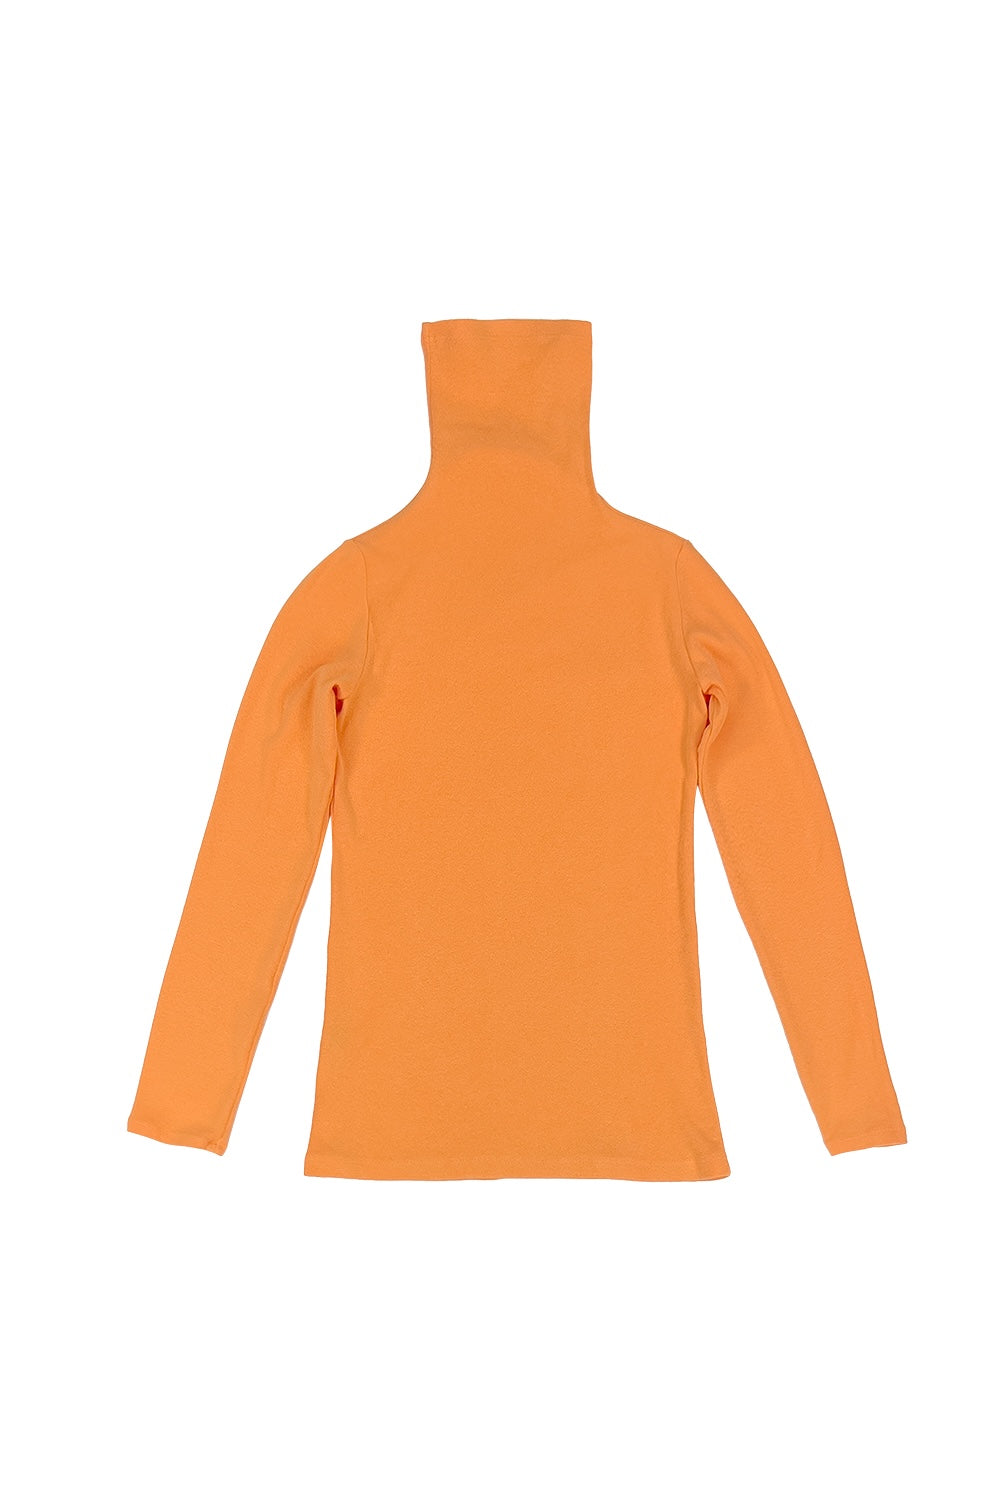 Whidbey Turtleneck | Jungmaven Hemp Clothing & Accessories / Color:Apricot Crush